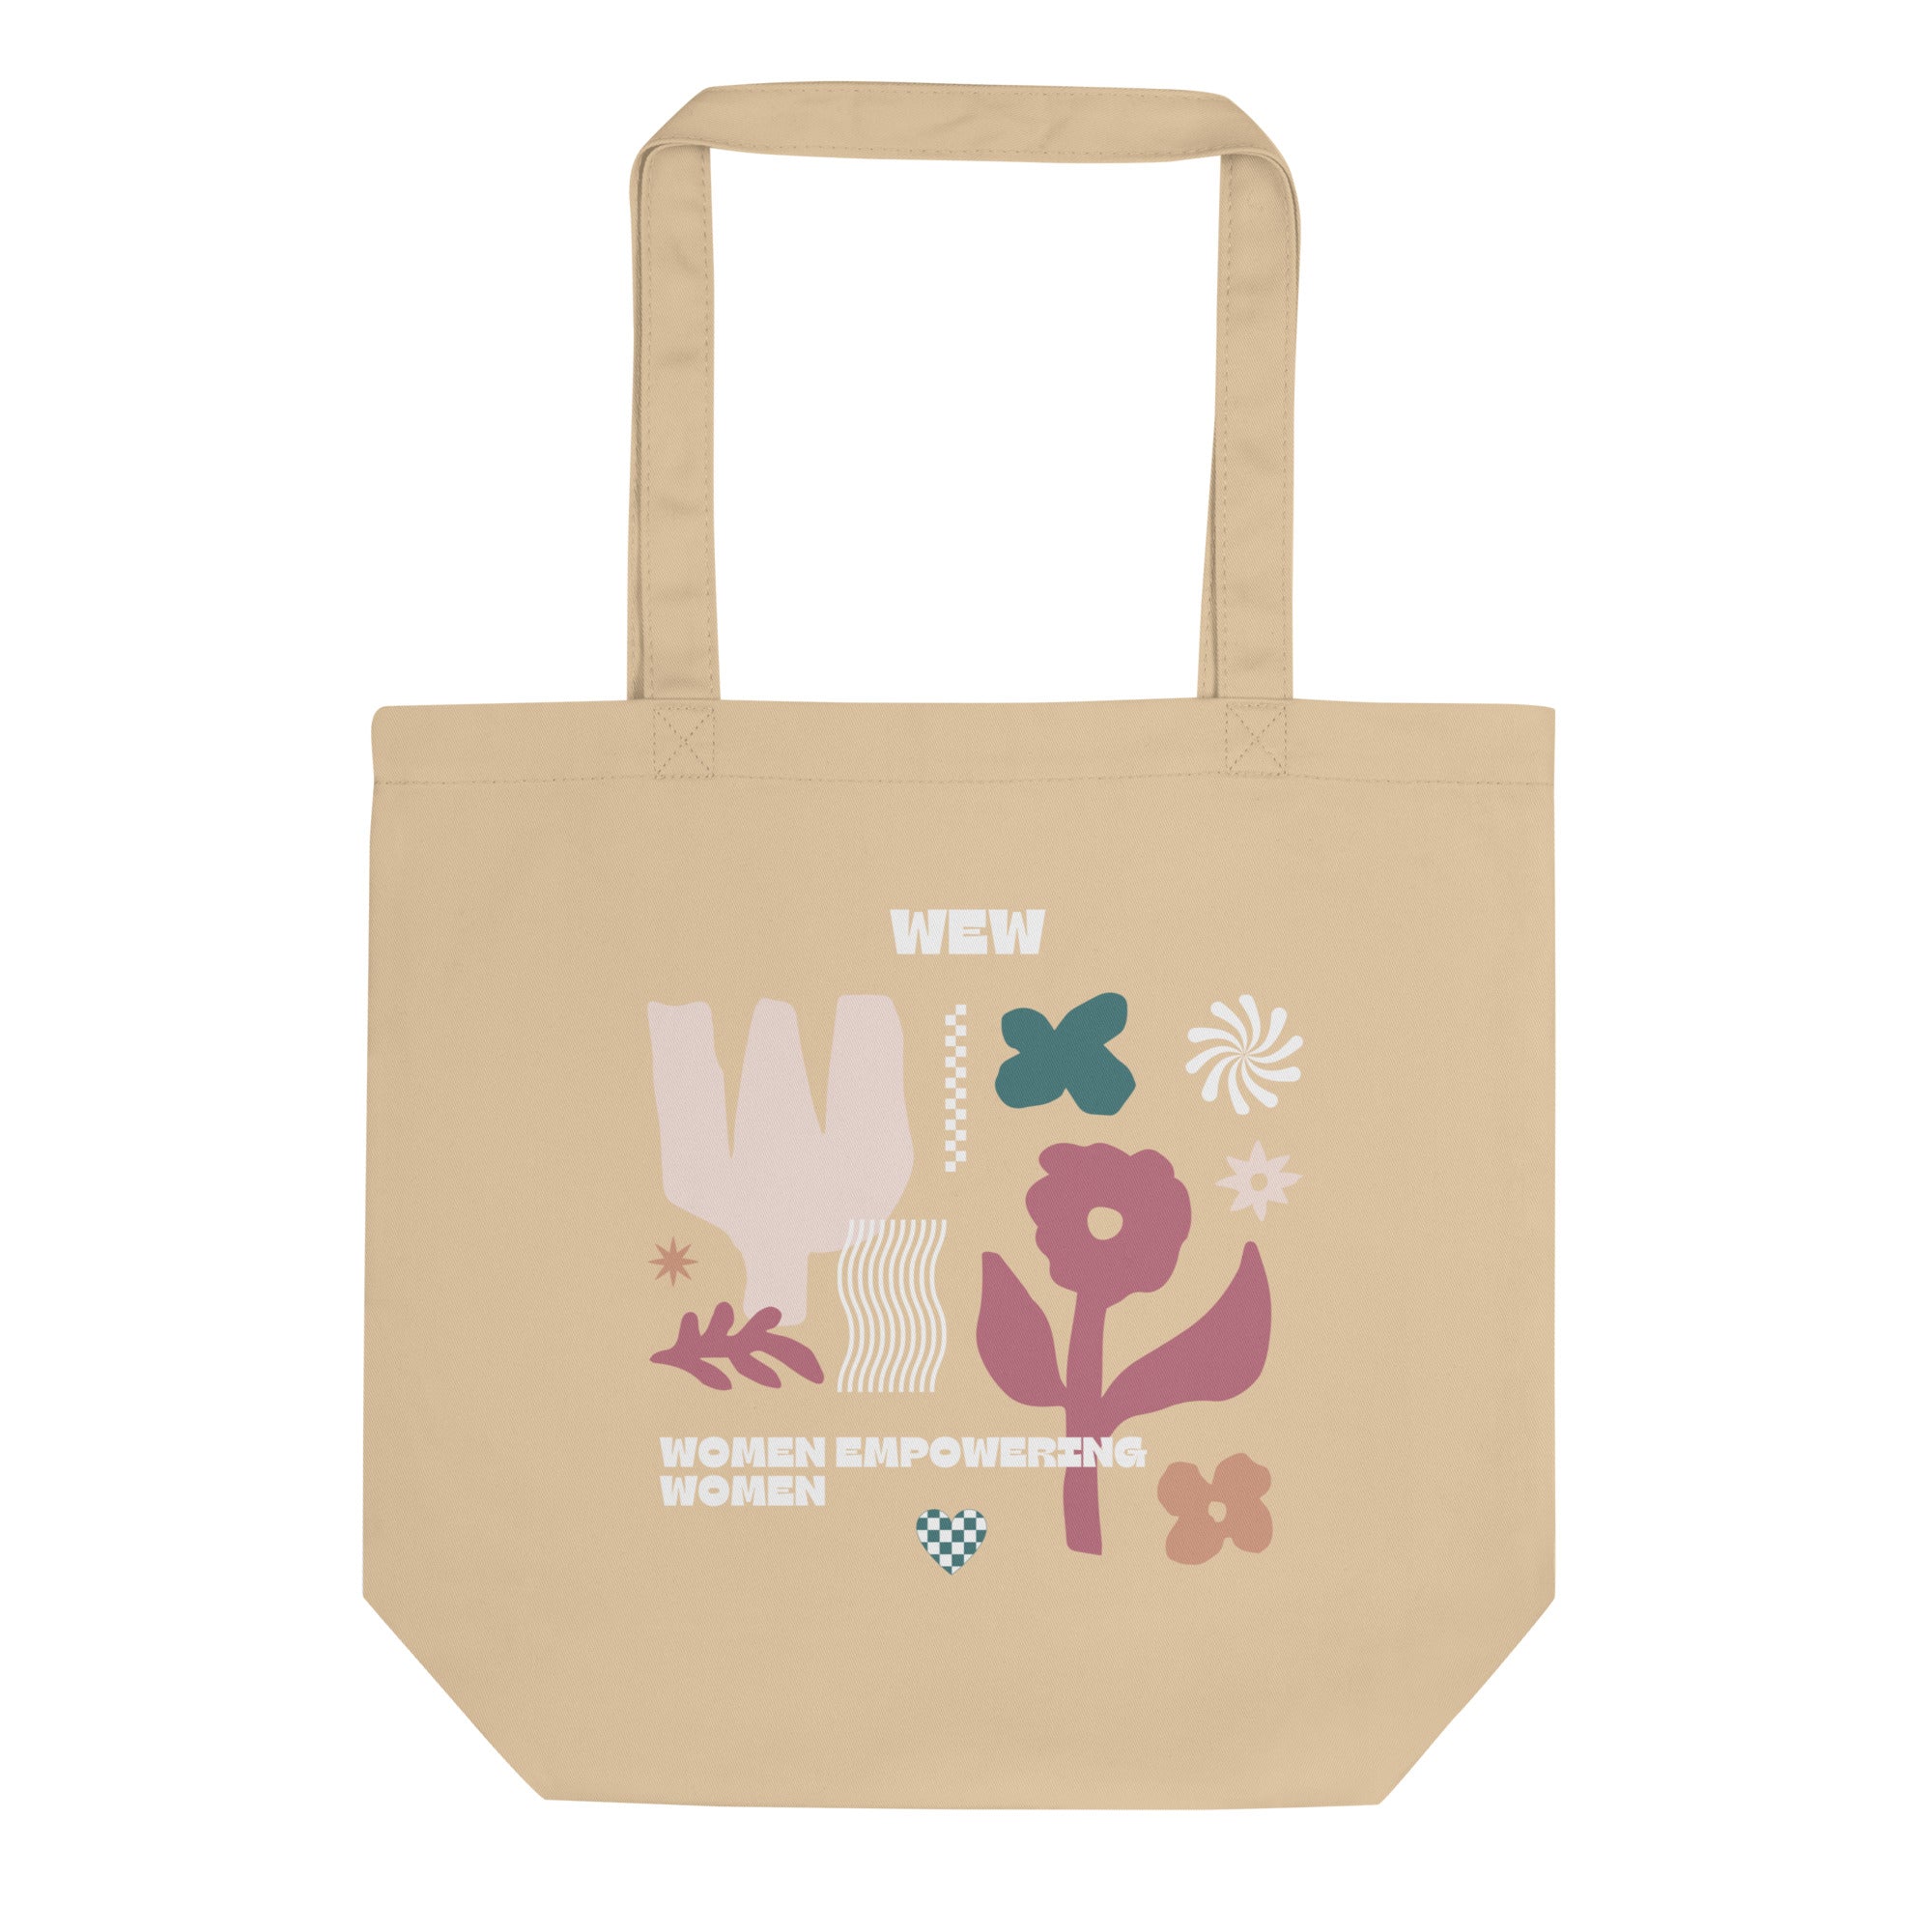 organic oyster colored cotton tote bag against white background. the cream colored tote bag has pink and green flowers along with the phrase women empowering women